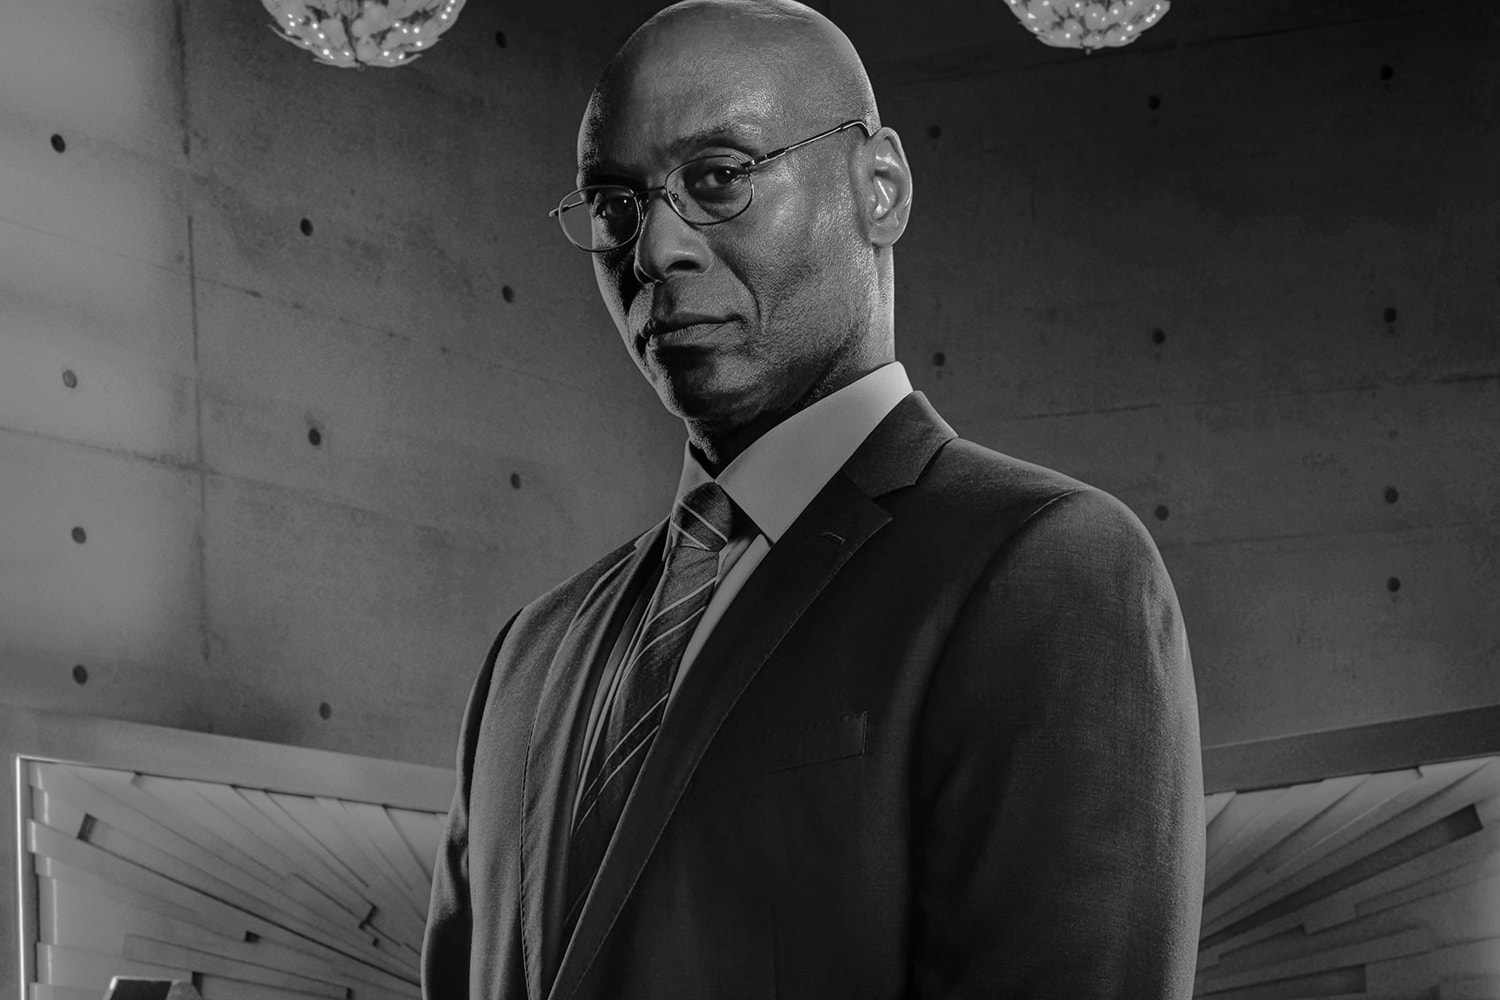 Lance Reddick, star of 'The Wire' and 'John Wick,' dead at 60